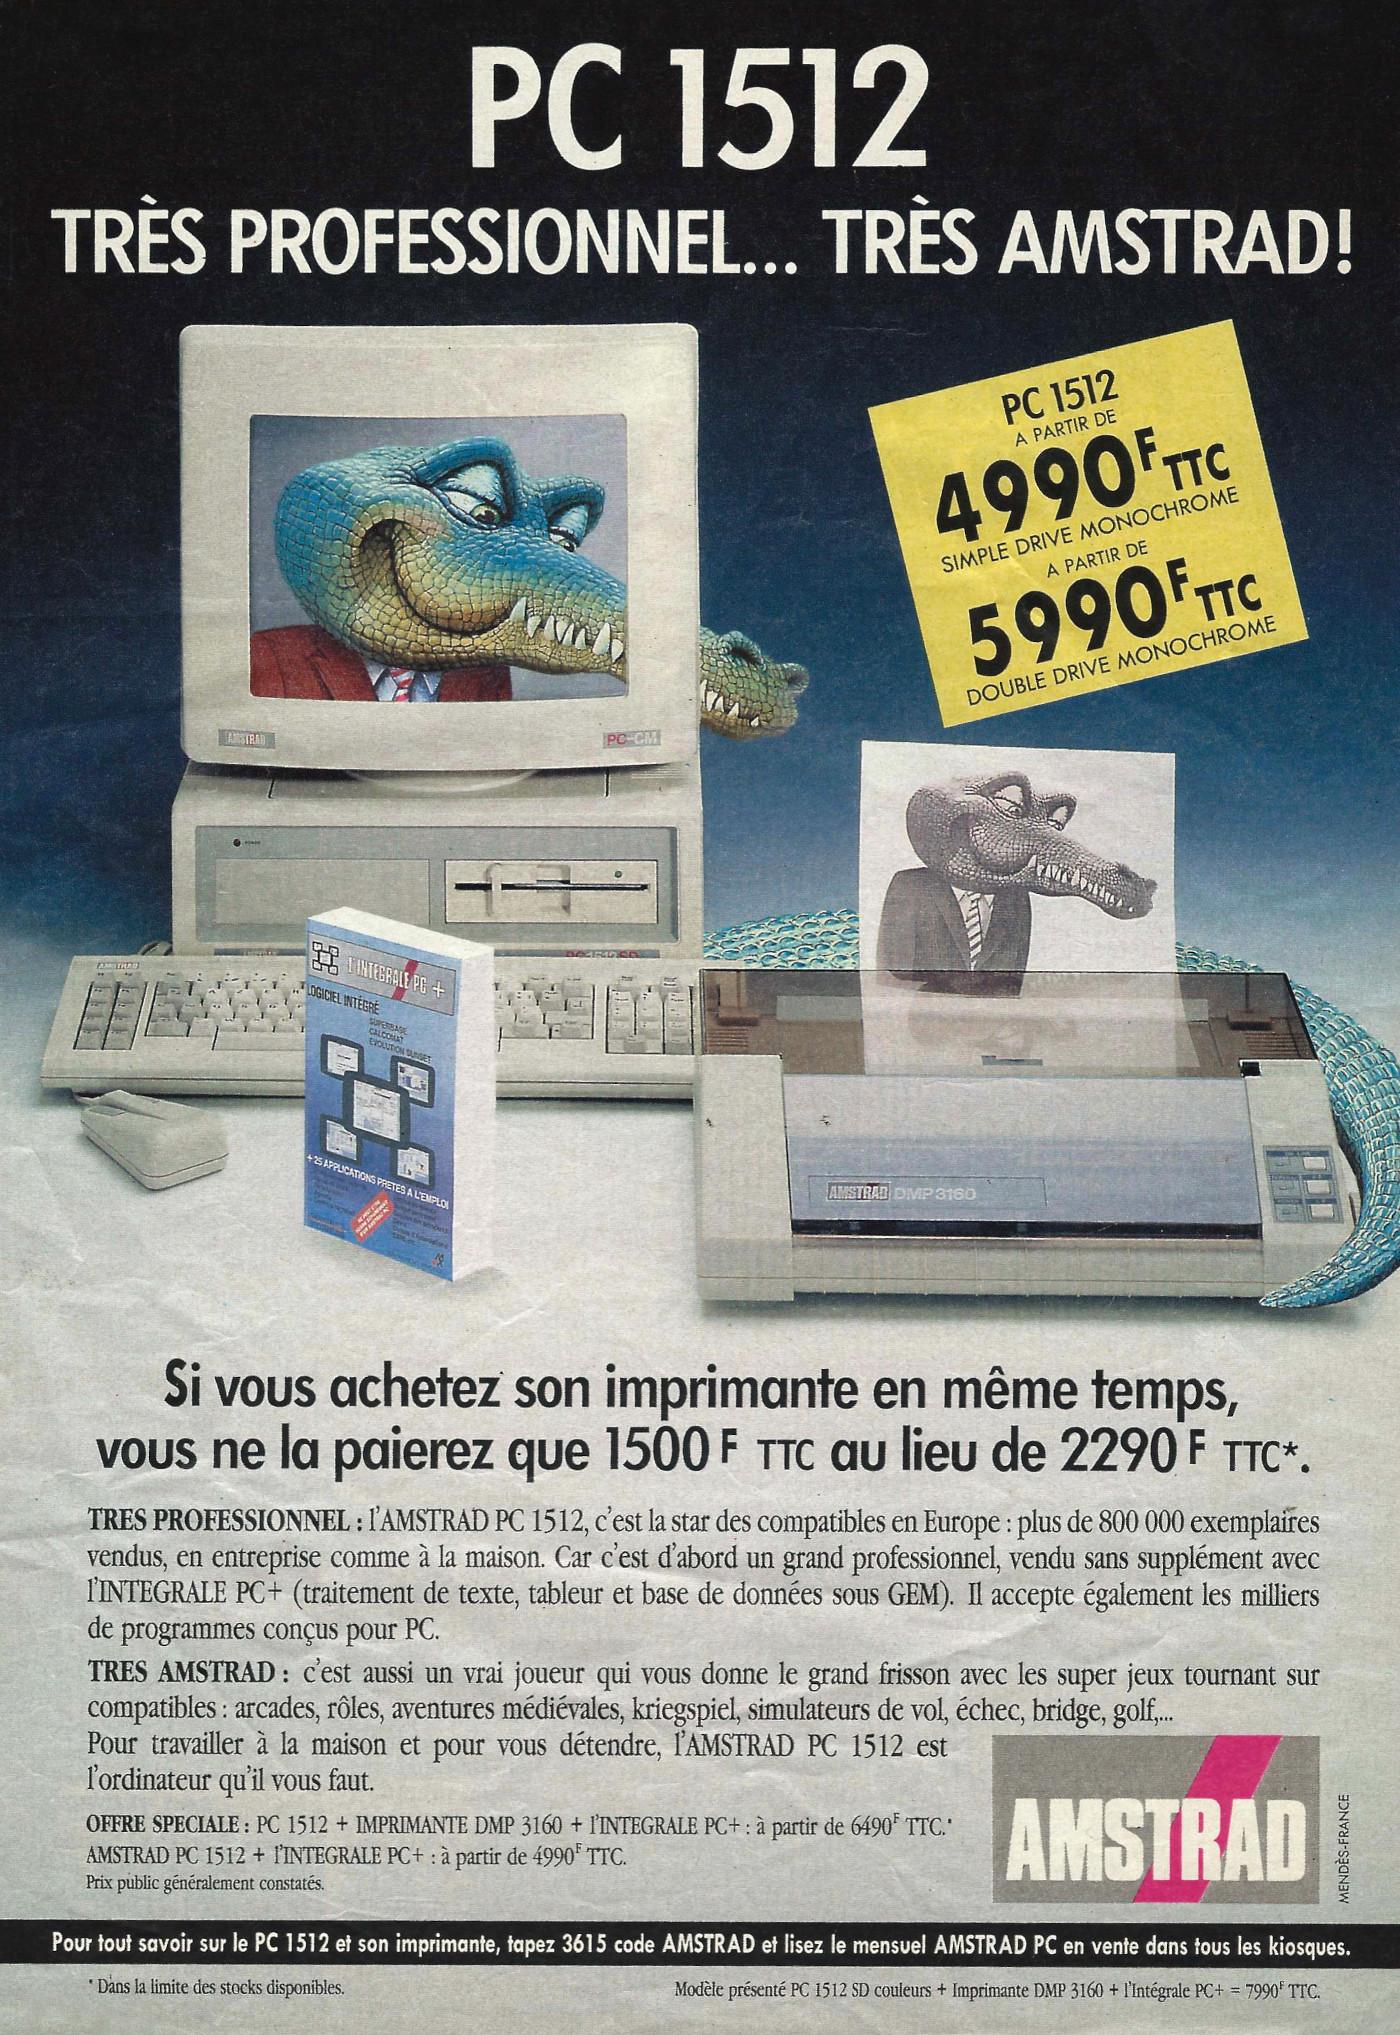 An Amstrad advert placed in a French magazine, showing the <span class='hilite'>PC 1512</span> in a bundle offer with a printer for 1500F instead of 2290F, which is about a £79 discount, or £250 in 2024. The advert also claims that more than 800,000 1512s had been sold to businesses and home users.